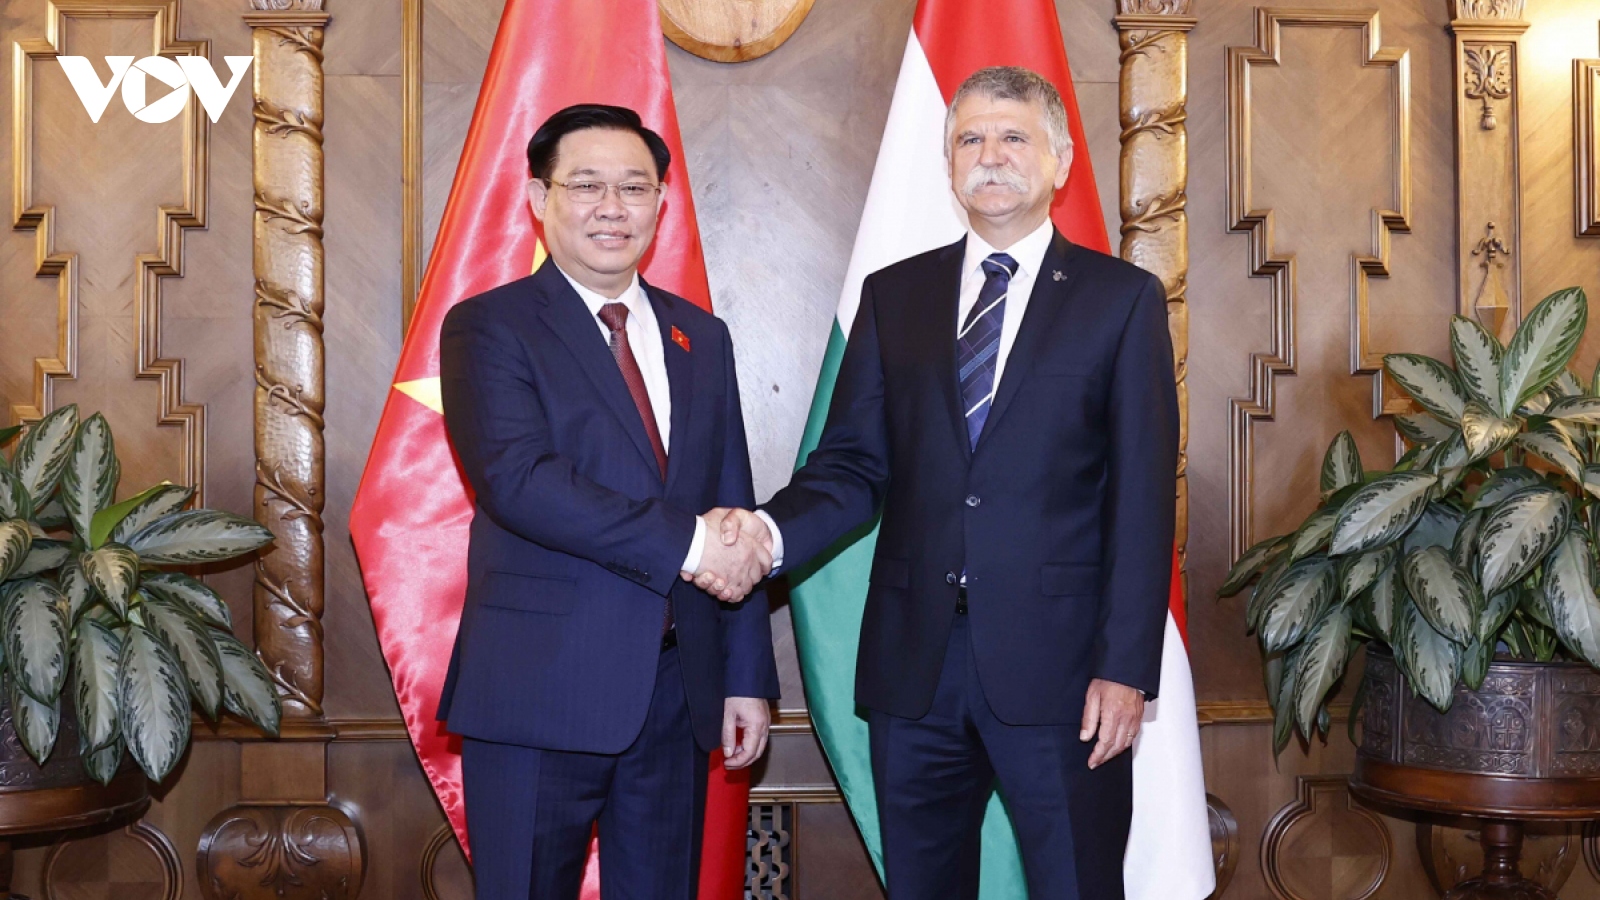 Congratulations on National Day of Hungary